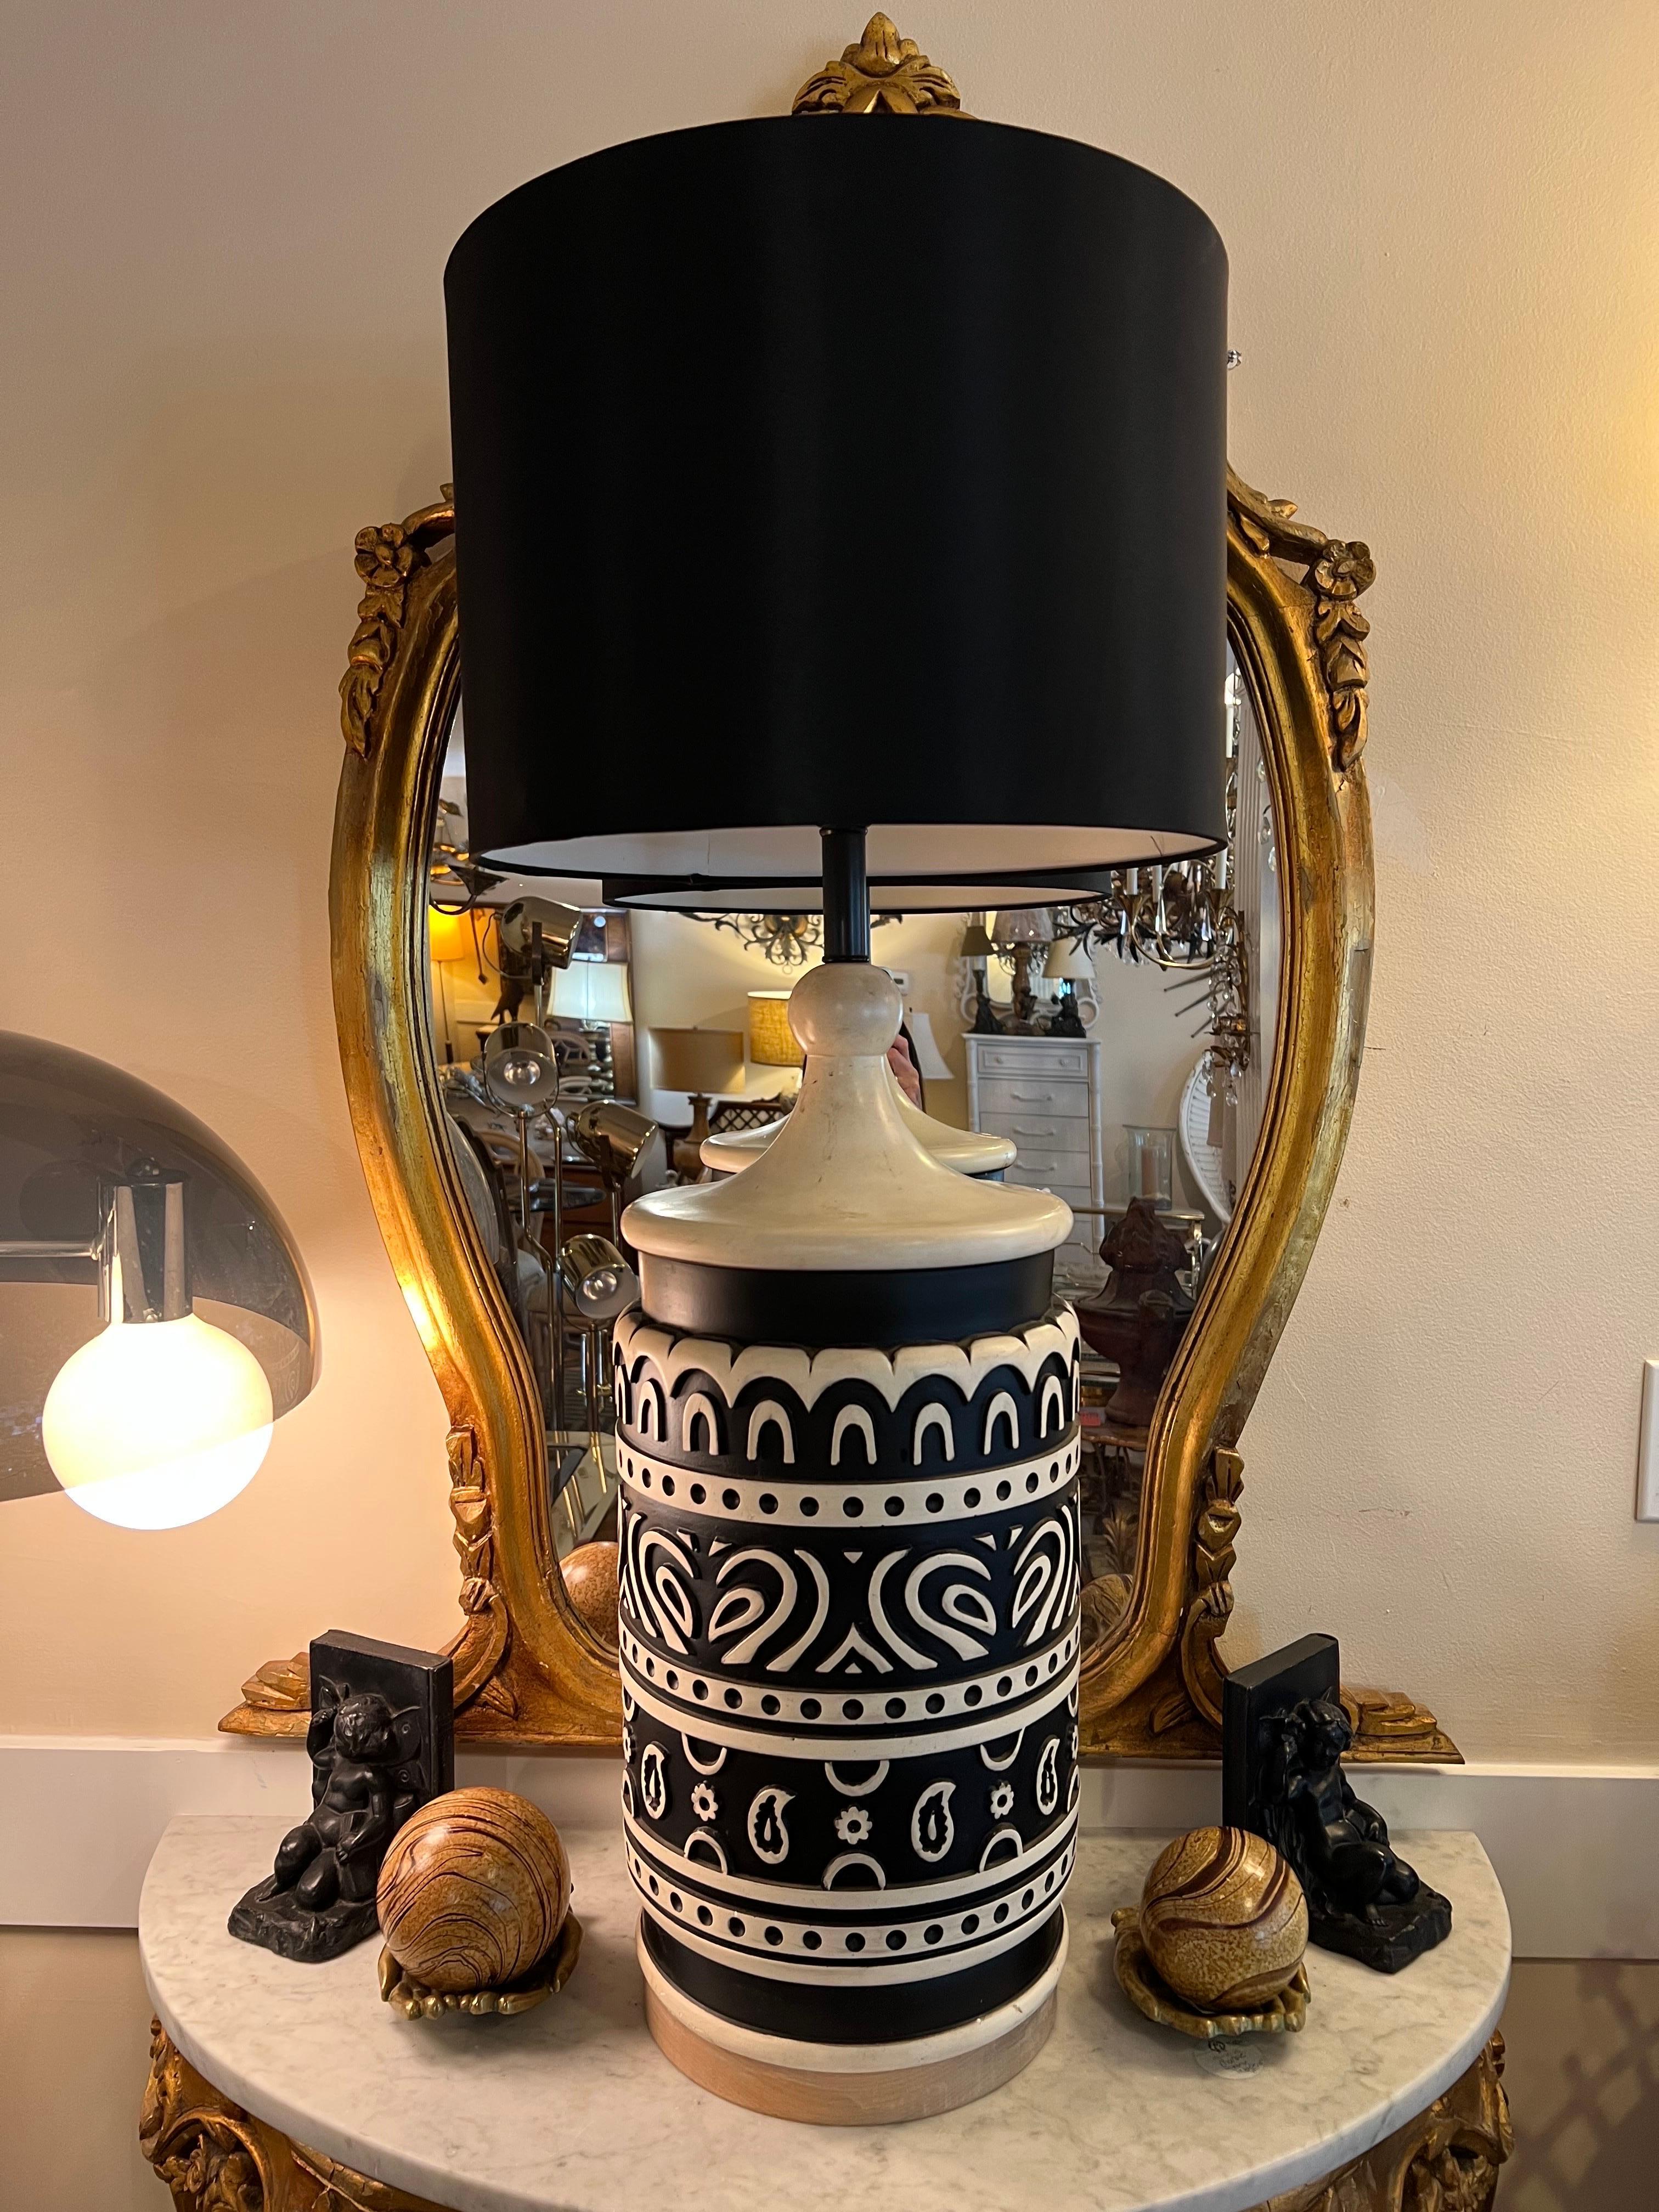 Mid-Century Modern Ceramic tiki lamp. Amazing one of a kind lamp with detailed geometric and paisley designs in black and cream. It has a natural wooden base in round with a black silk drum shade. The actual ceramic part of the lamp measures 10